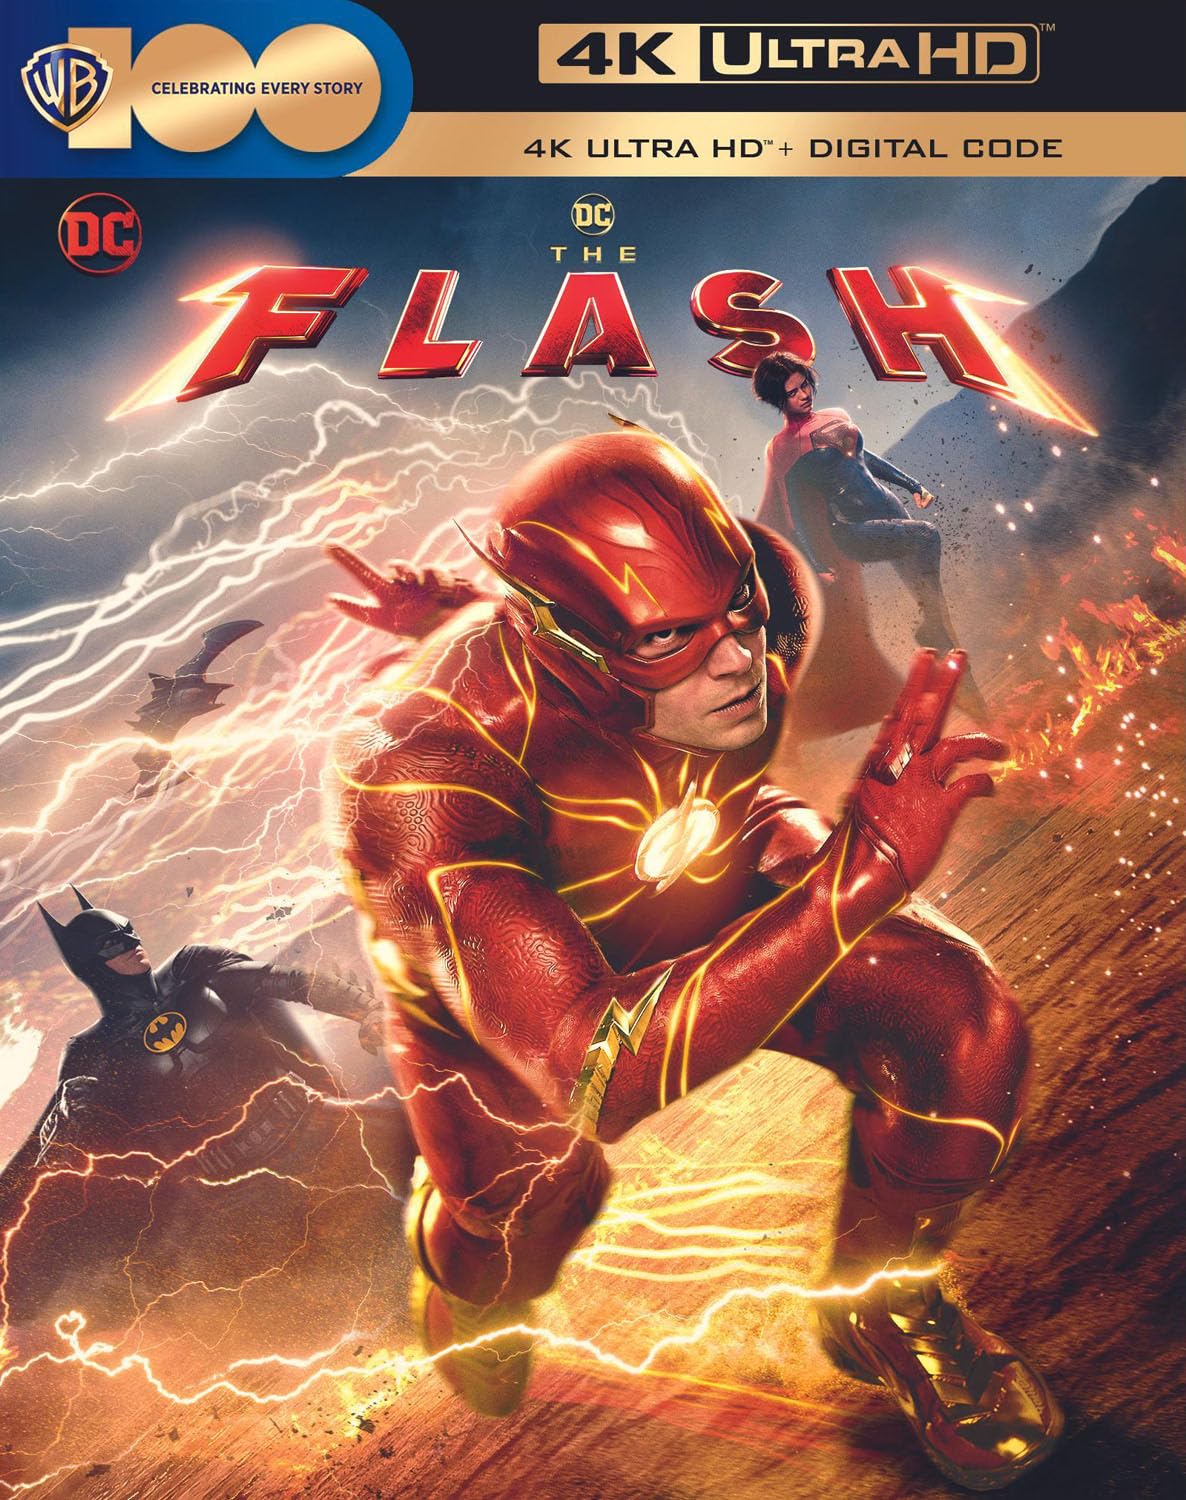 The Flash 4k Bluray/Bluray Digital Release Dates & Details Revealed